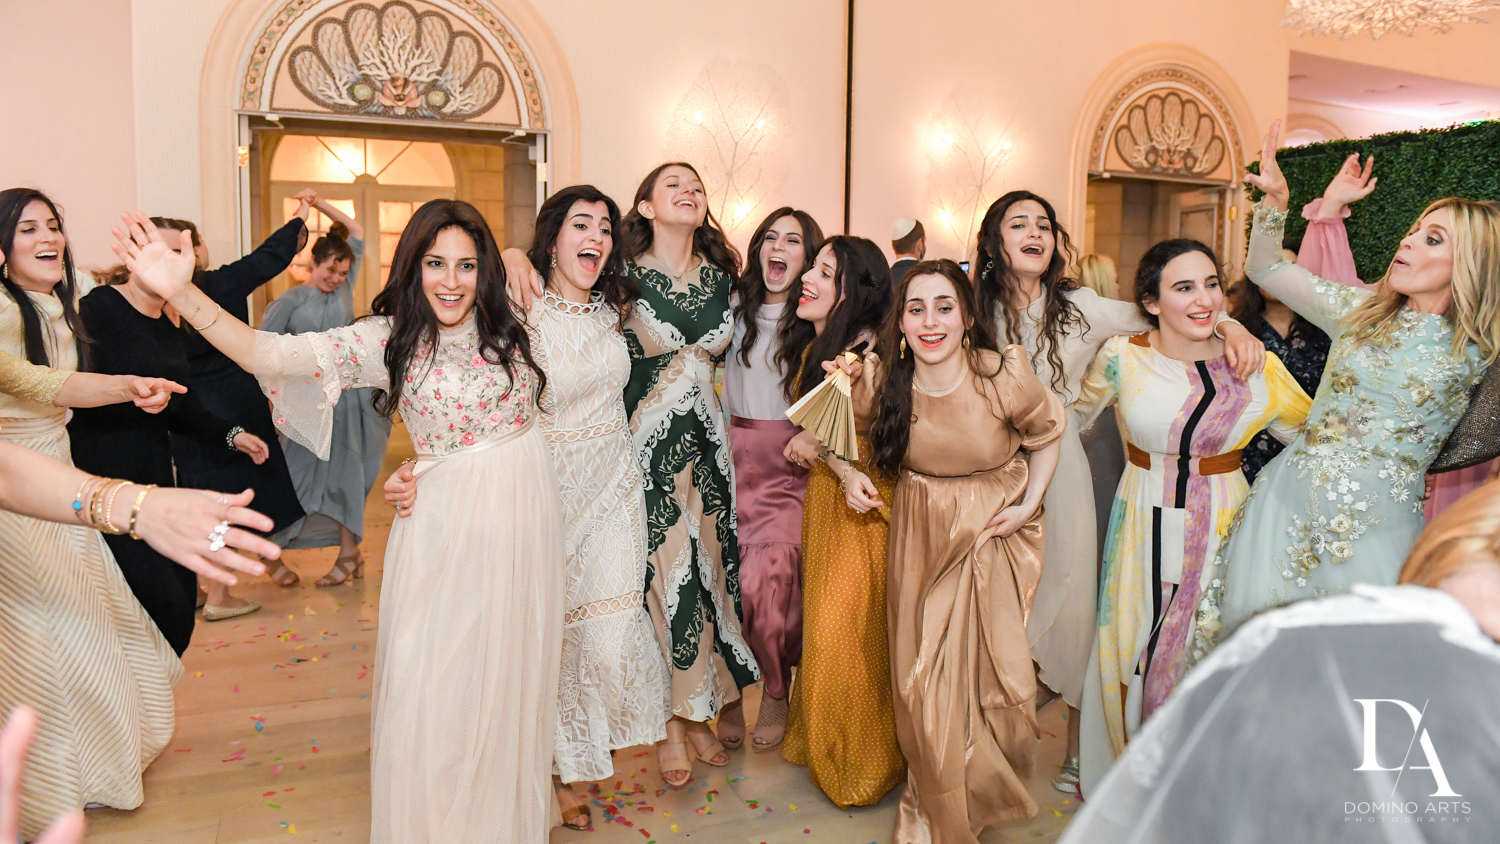 fun party photos from Jewish Orthodox Wedding in Palm Beach by Domino Arts Photography